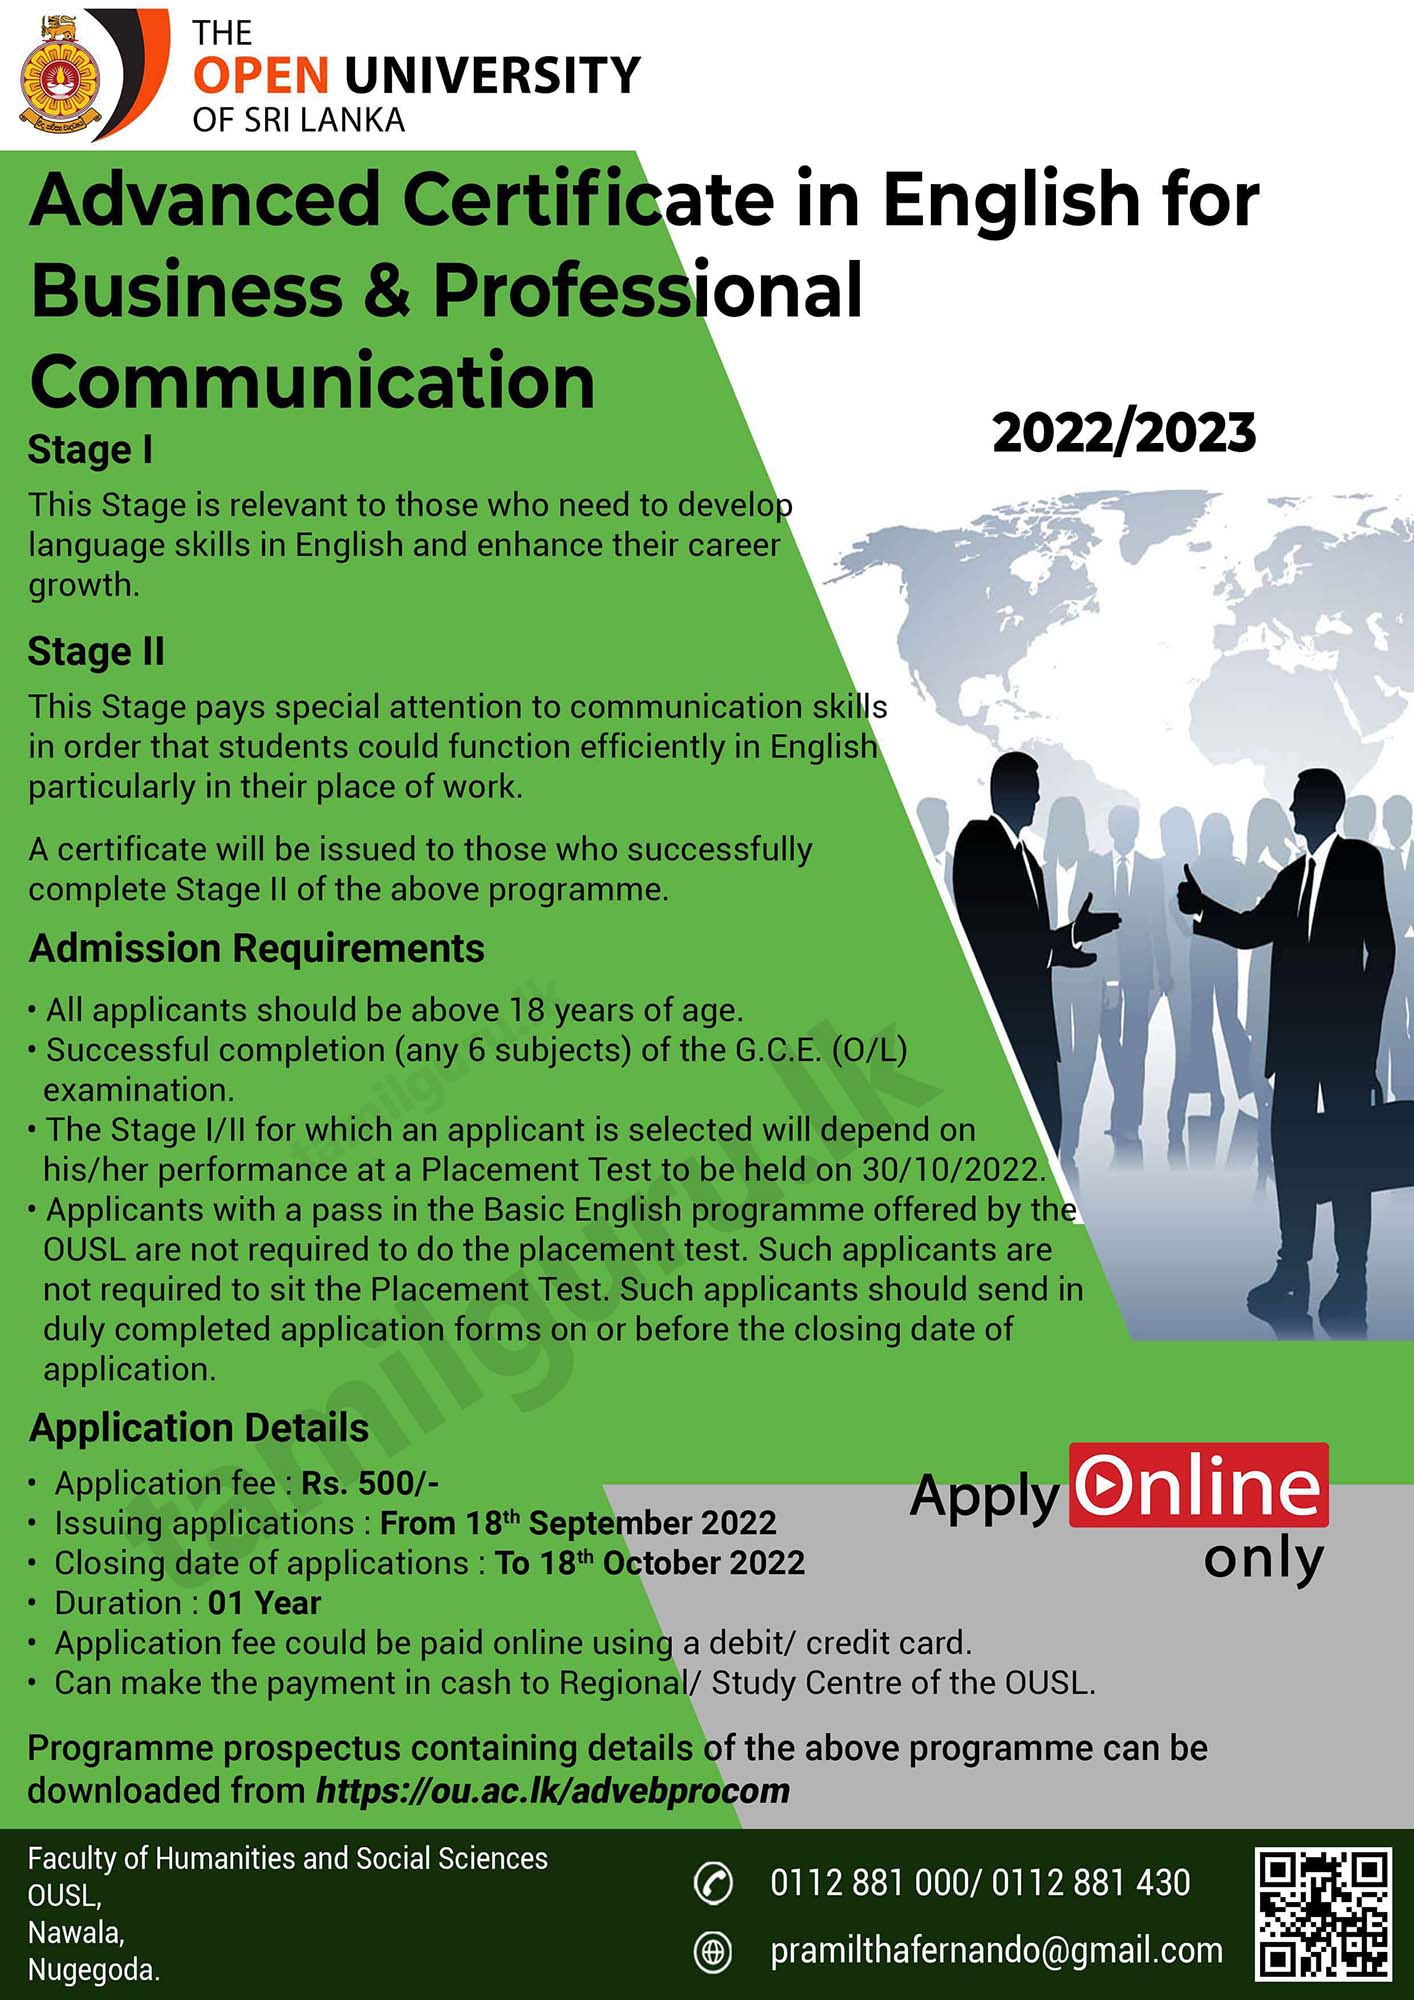 Advanced Certificate in English for Business & Professional Communication (2022) - Open University of Sri Lanka (OUSL)